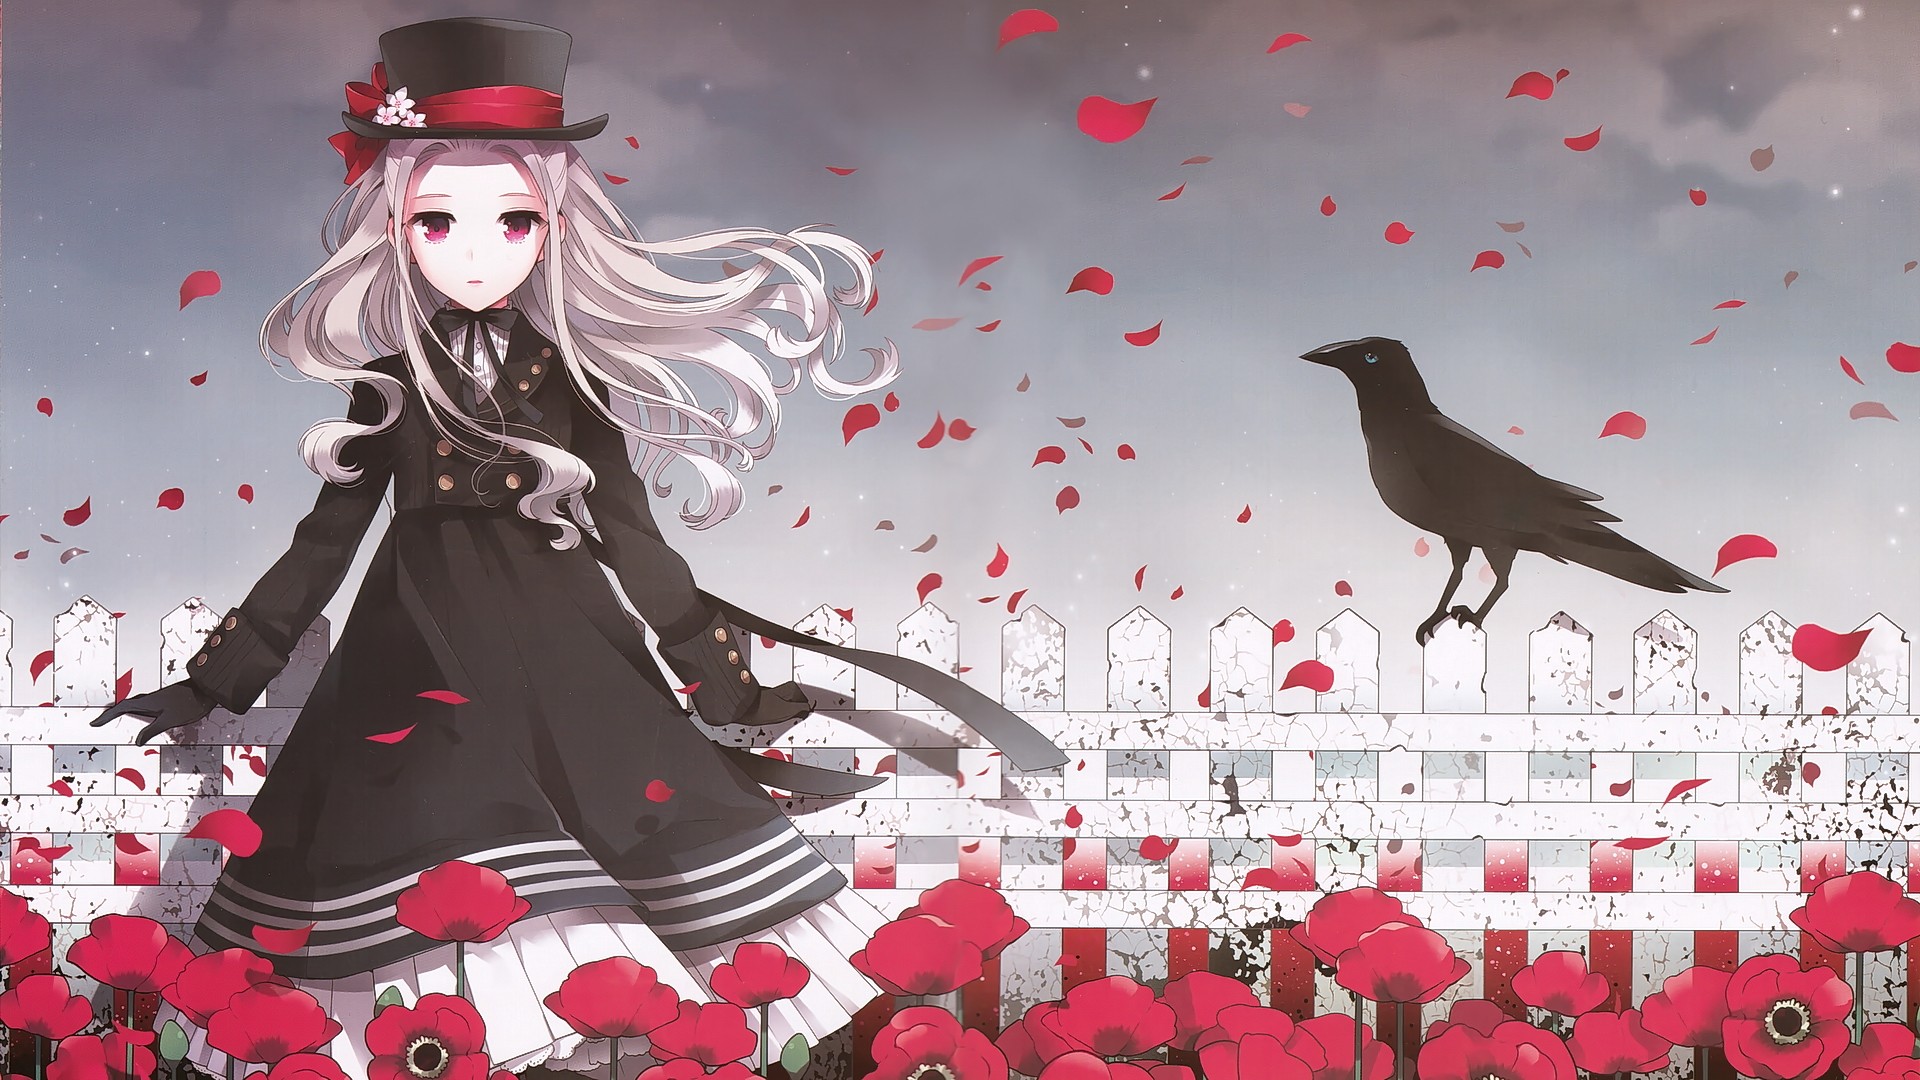 Anime 1920x1080 anime anime girls blonde long hair hat flowers birds gloves original characters looking at viewer dress artwork Nardack animals women with hats plants